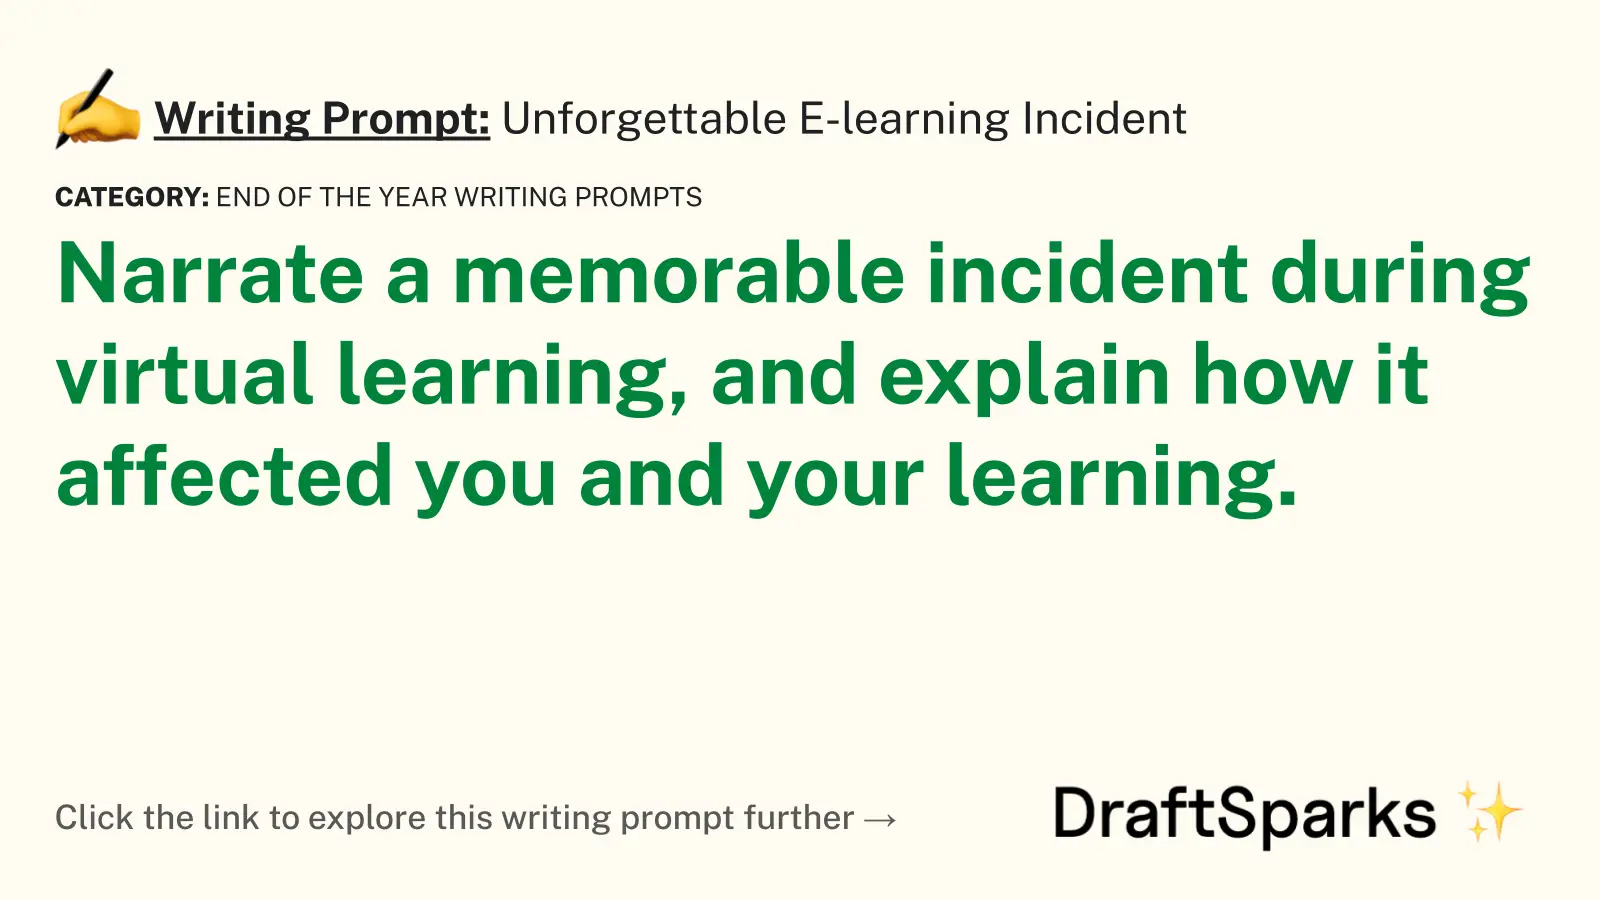 Unforgettable E-learning Incident